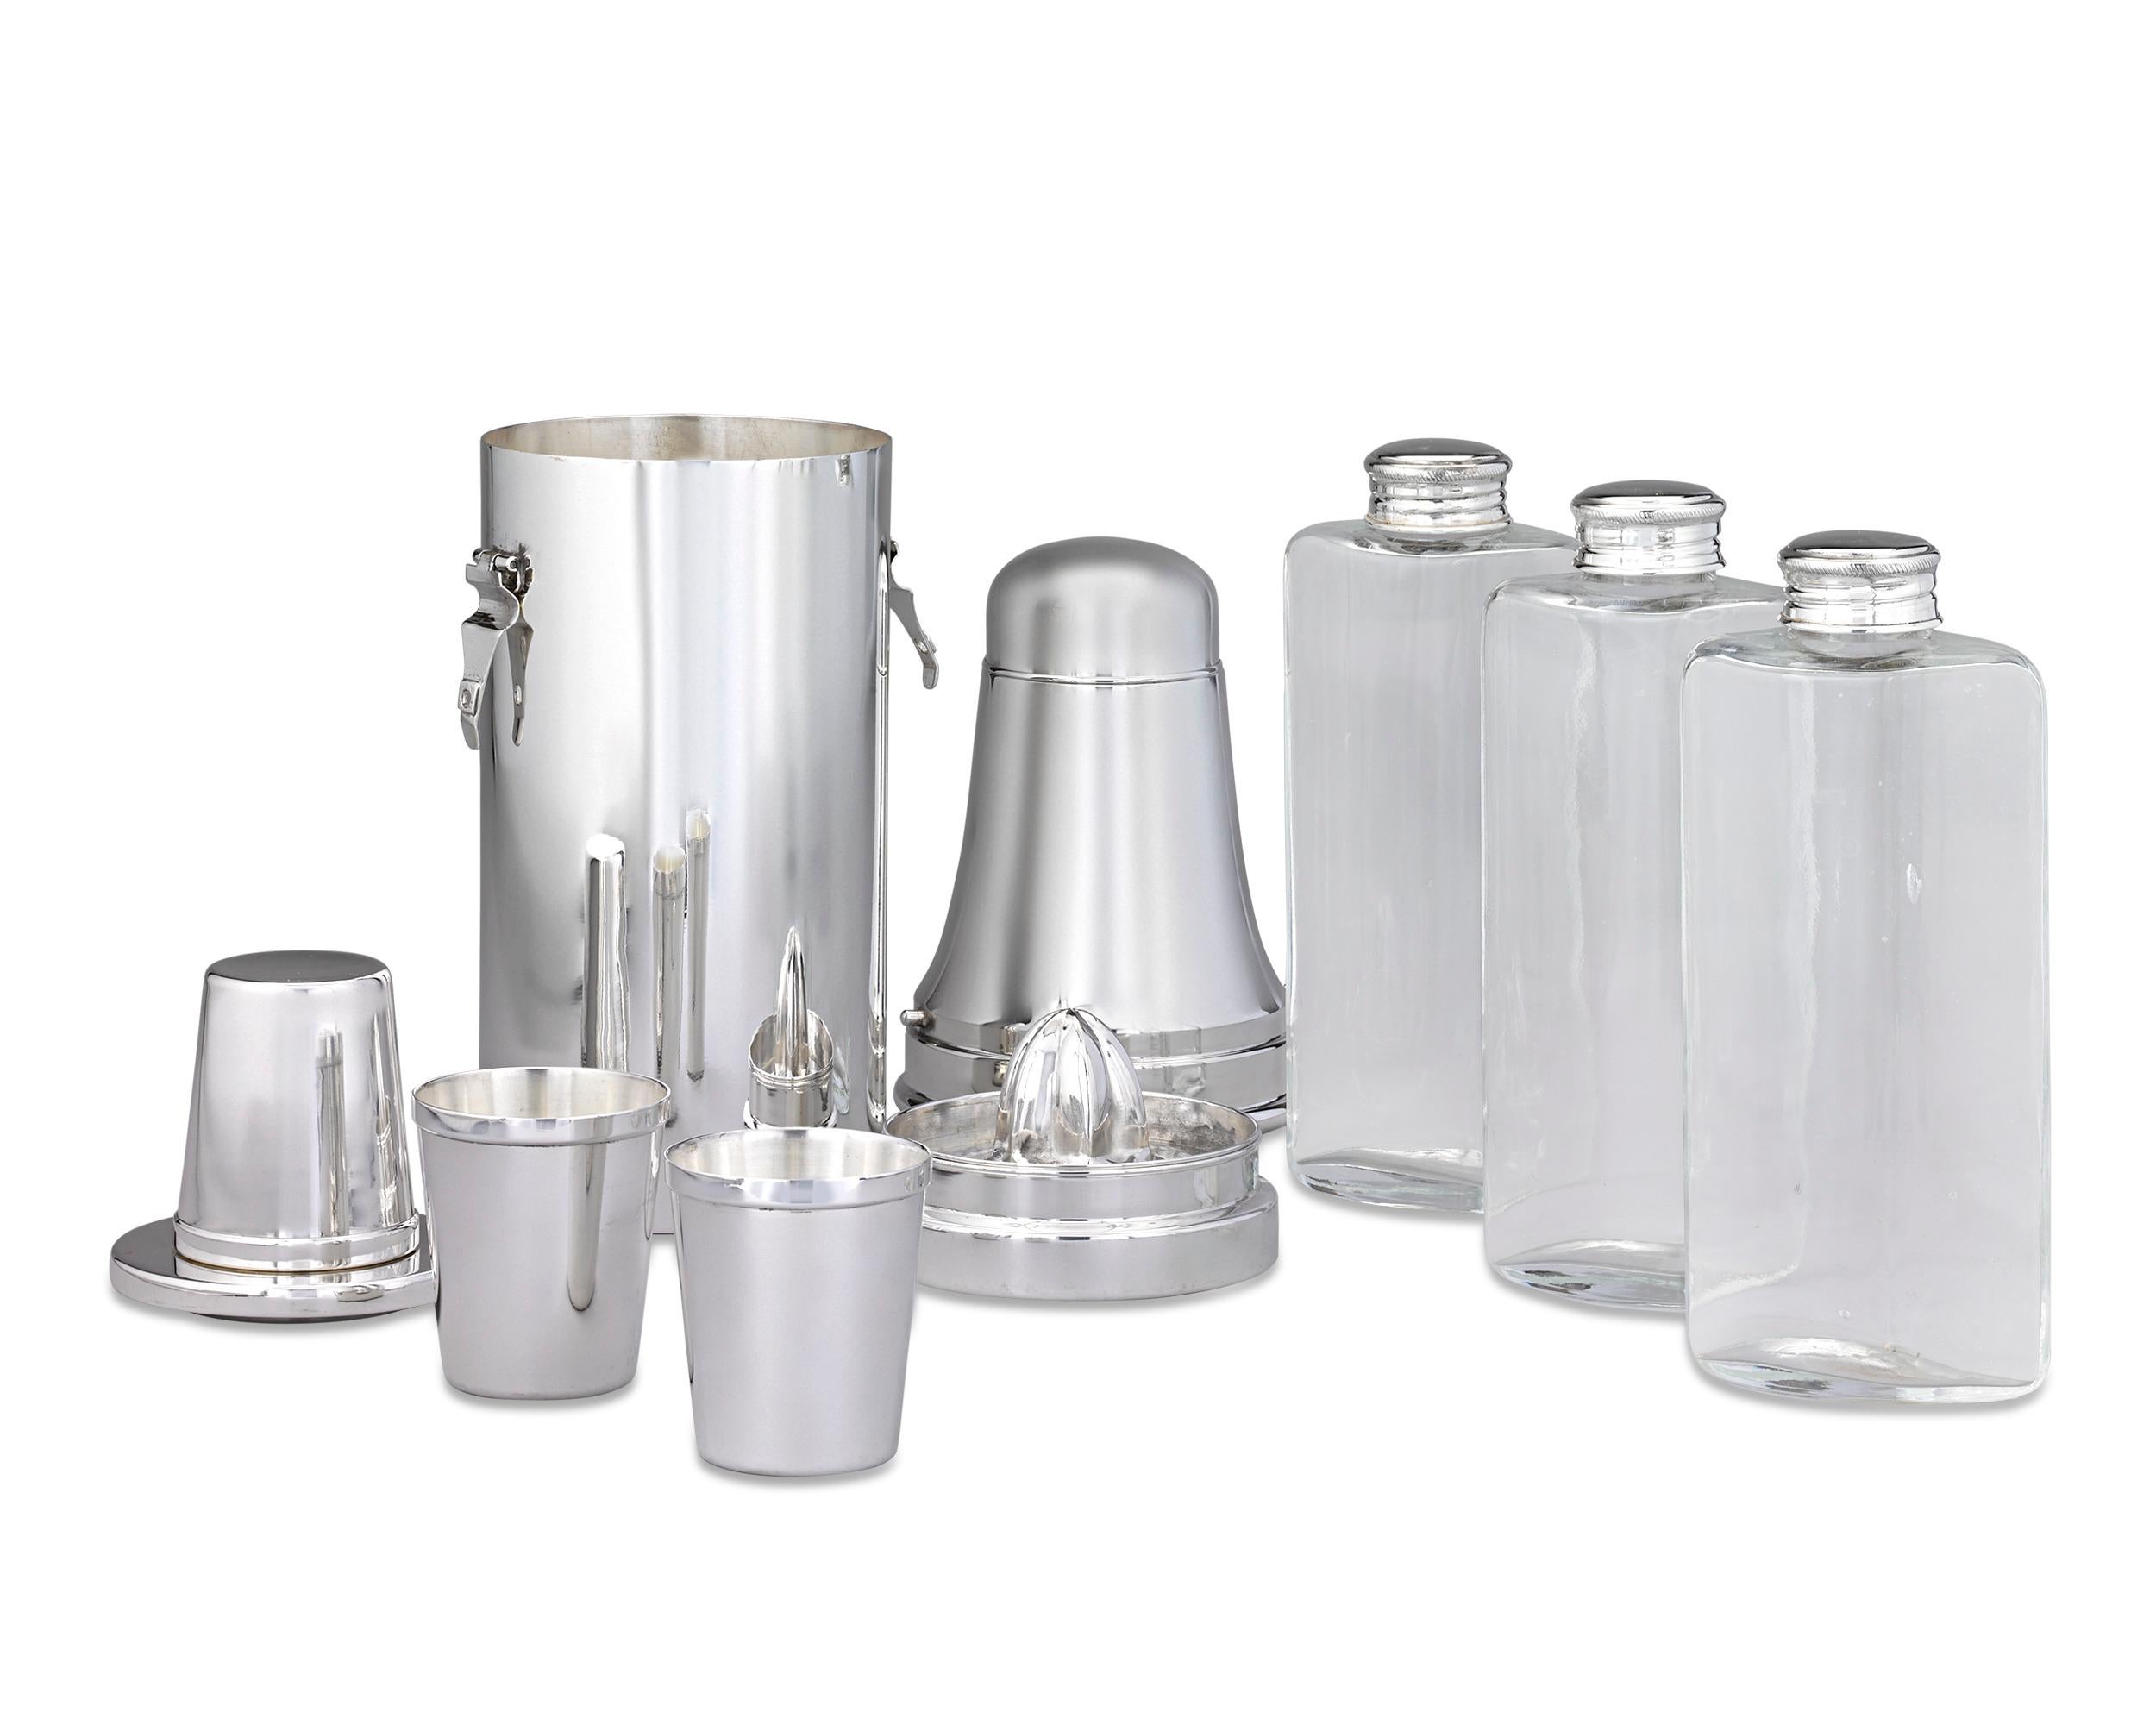 A beautiful bar accessory dating to the golden age of the cocktail, this wonderful traveling cocktail set was made by Mappin & Webb and features everything needed to craft and serve the perfect beverage. The entire set is made of silverplate and